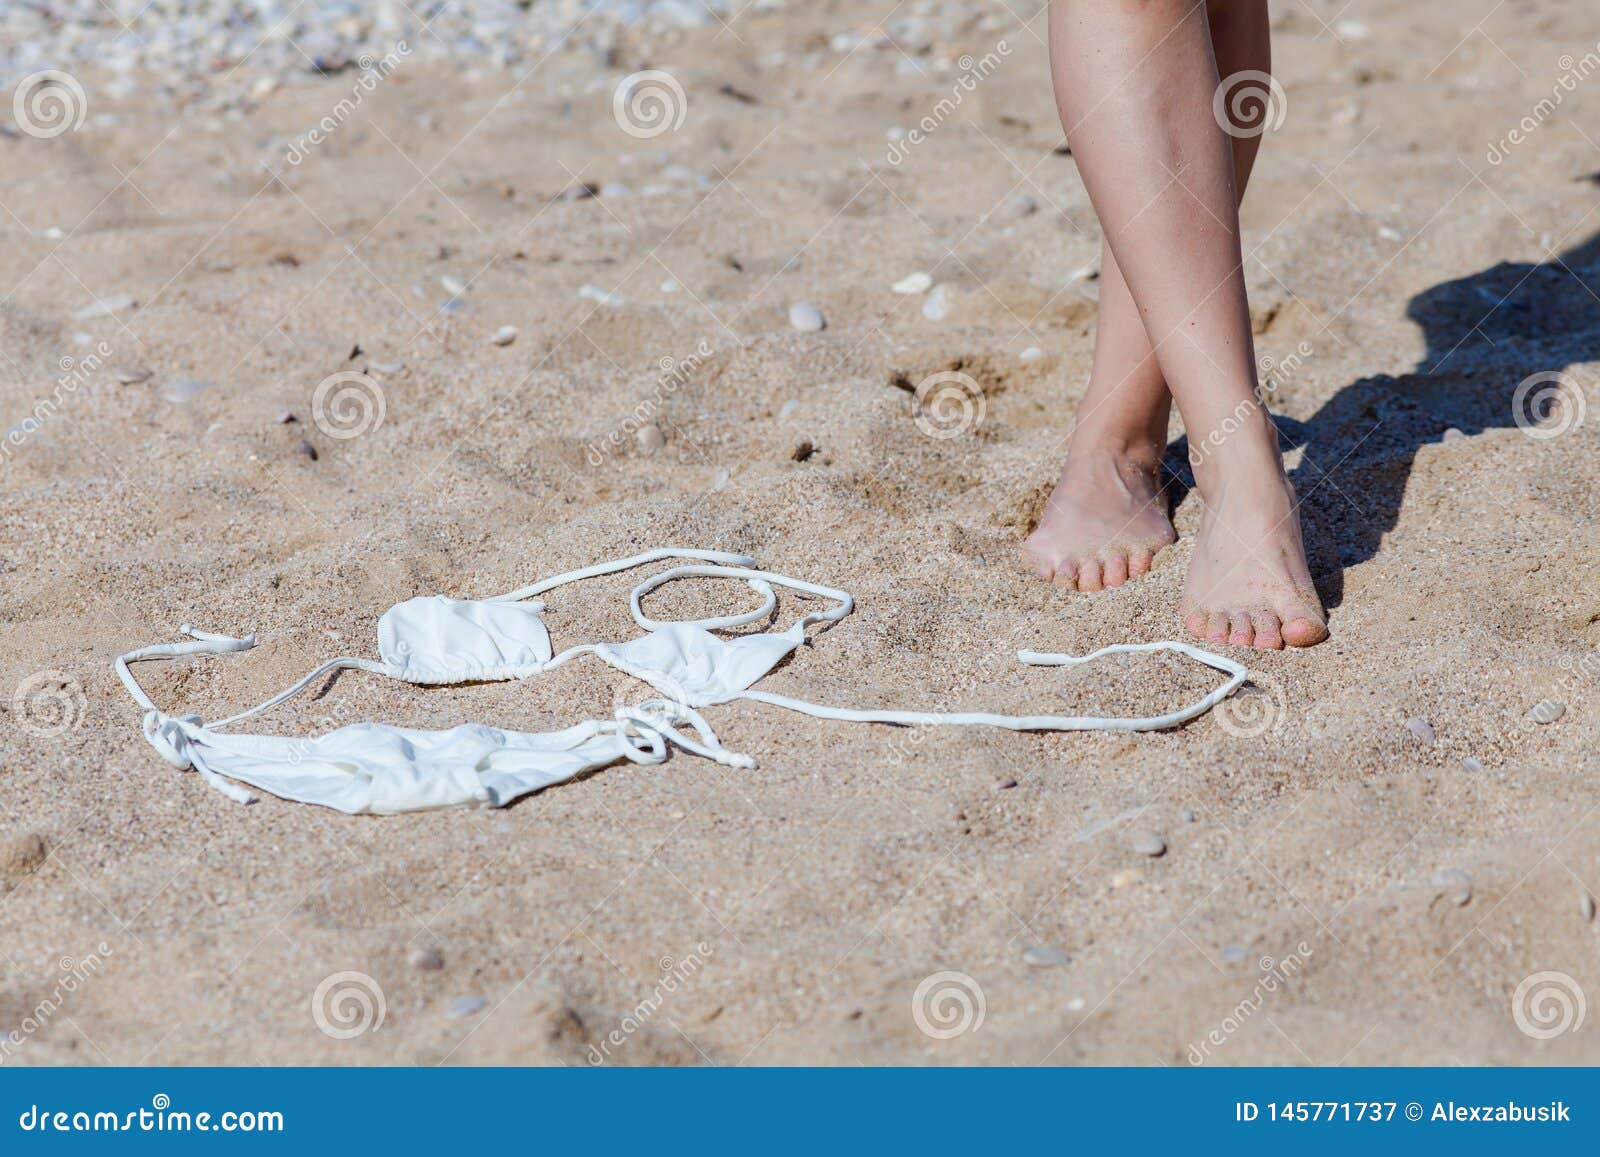 Tanned Feet of Woman and White Bikini on Sand Stock Image - Image of ...